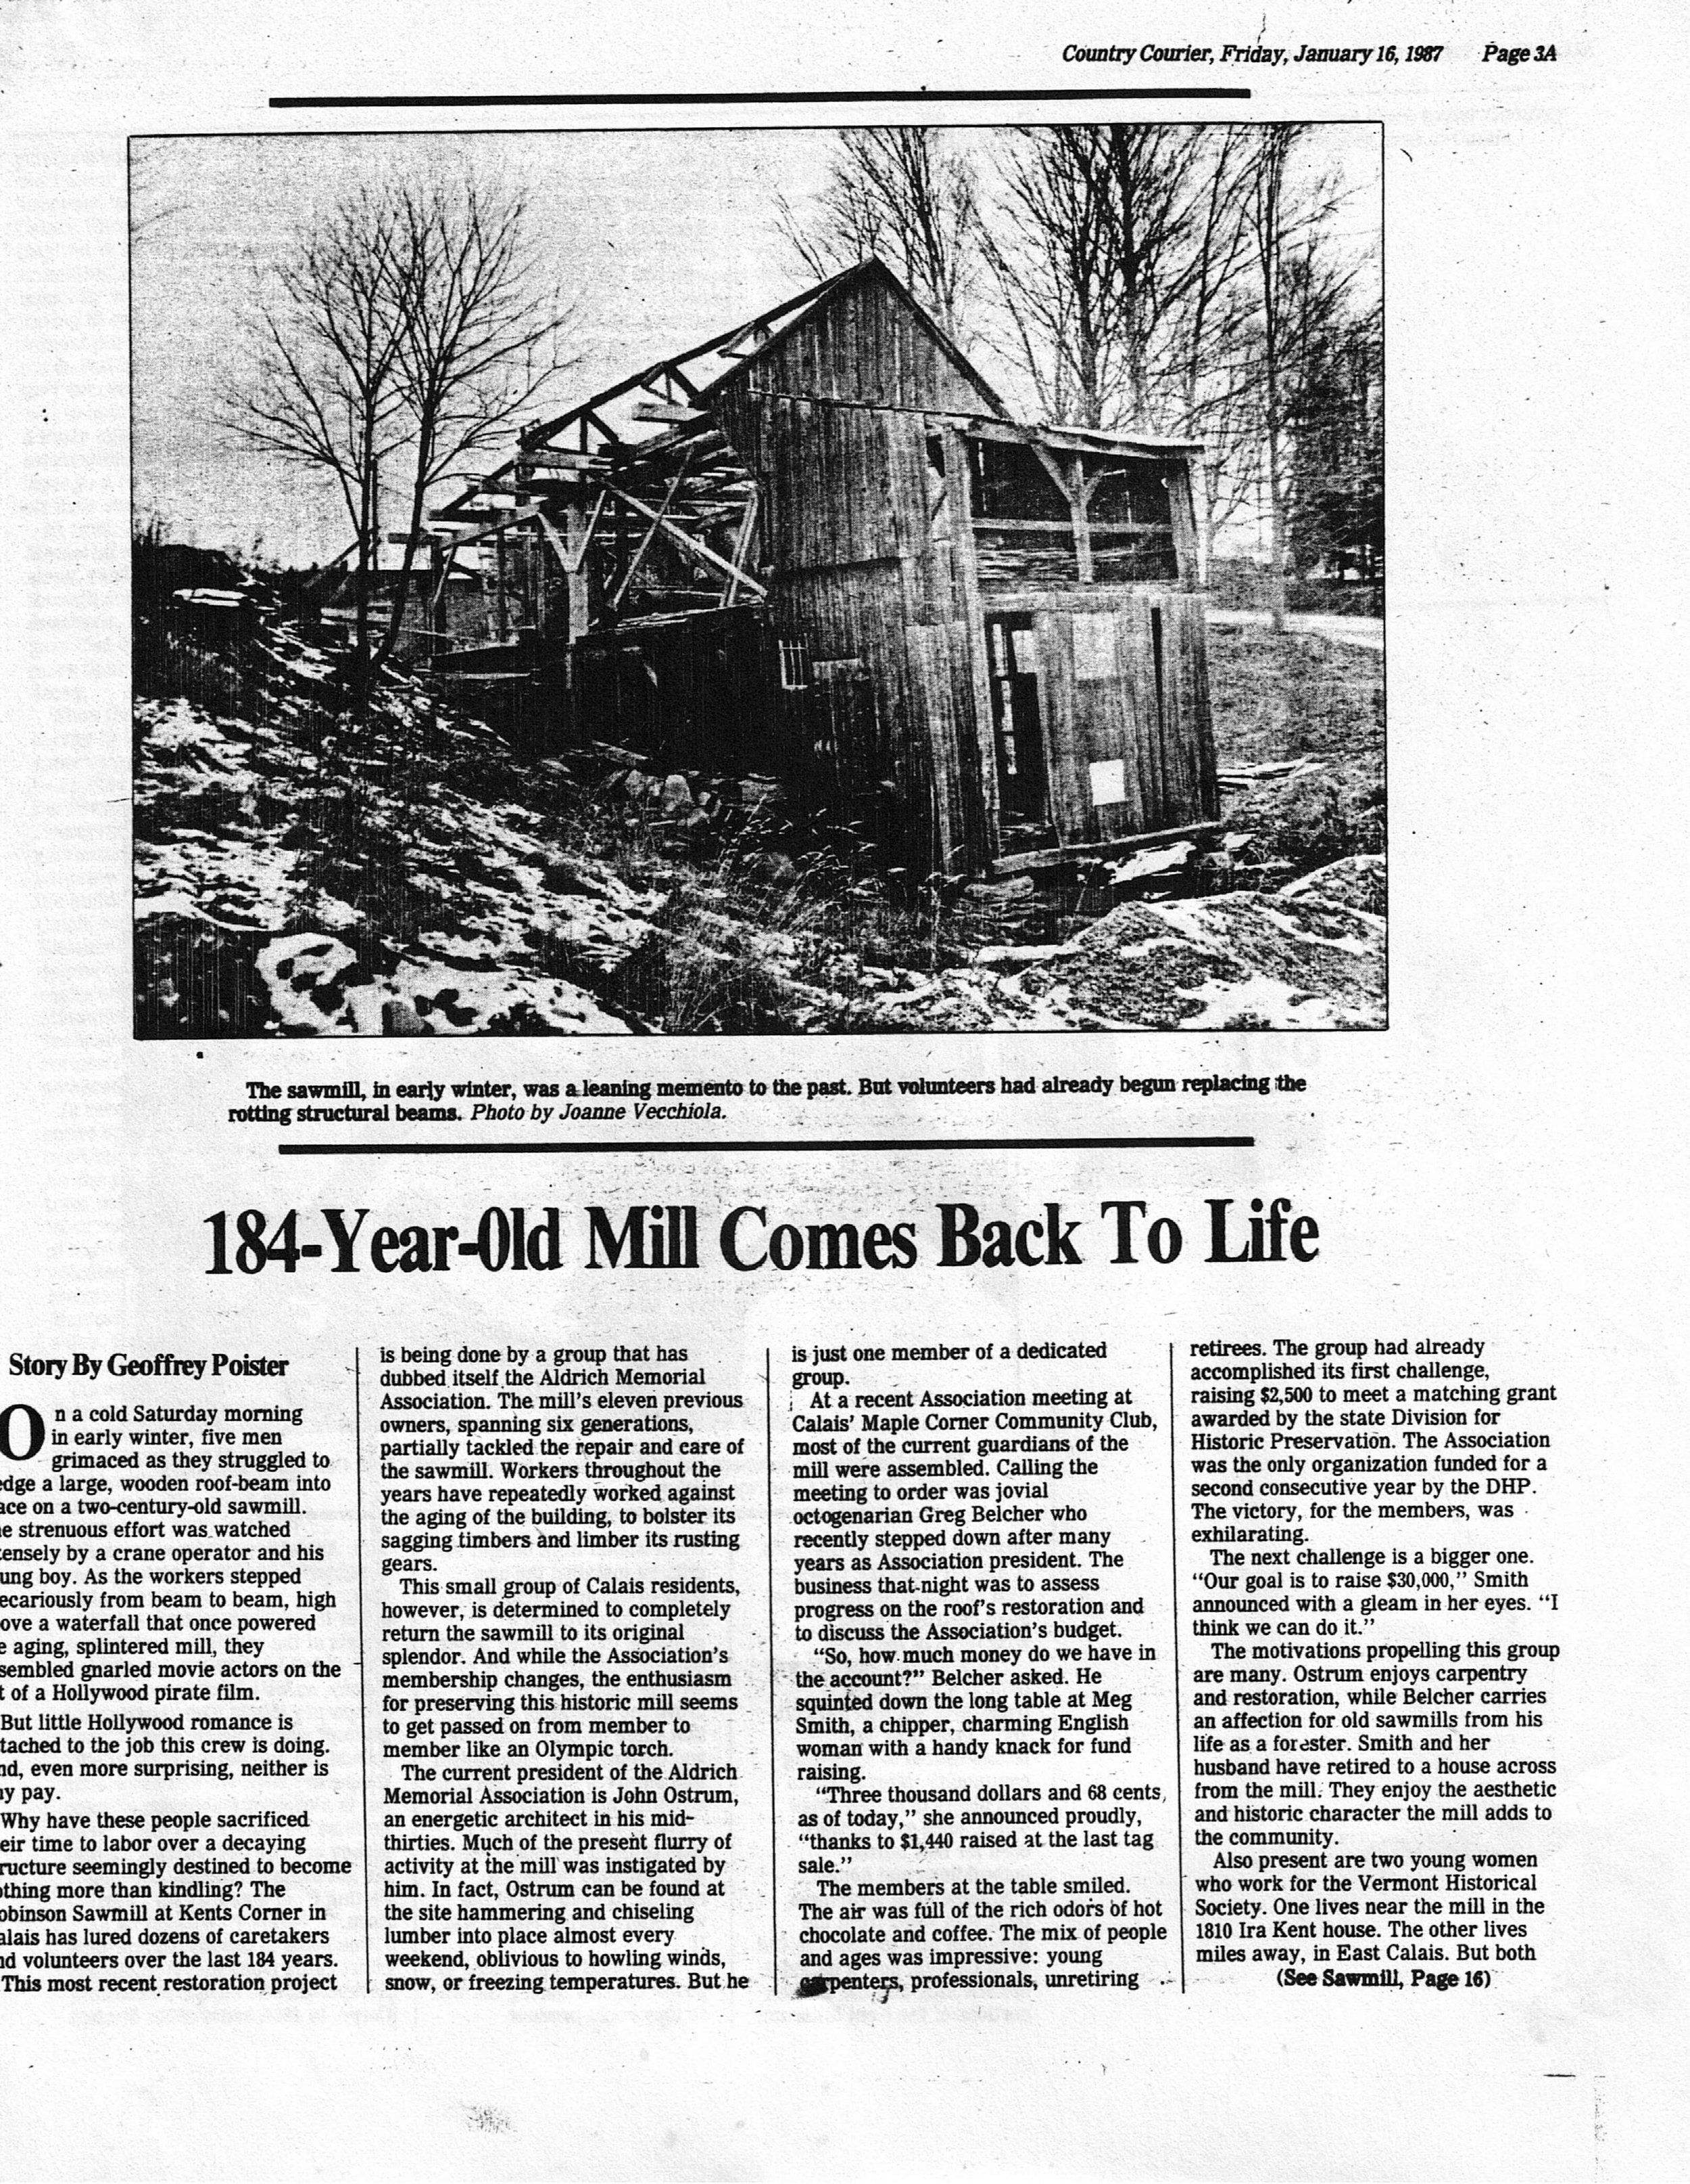 Newspaper article clipping: '184-Year-Old Mill Comes Back to Life'